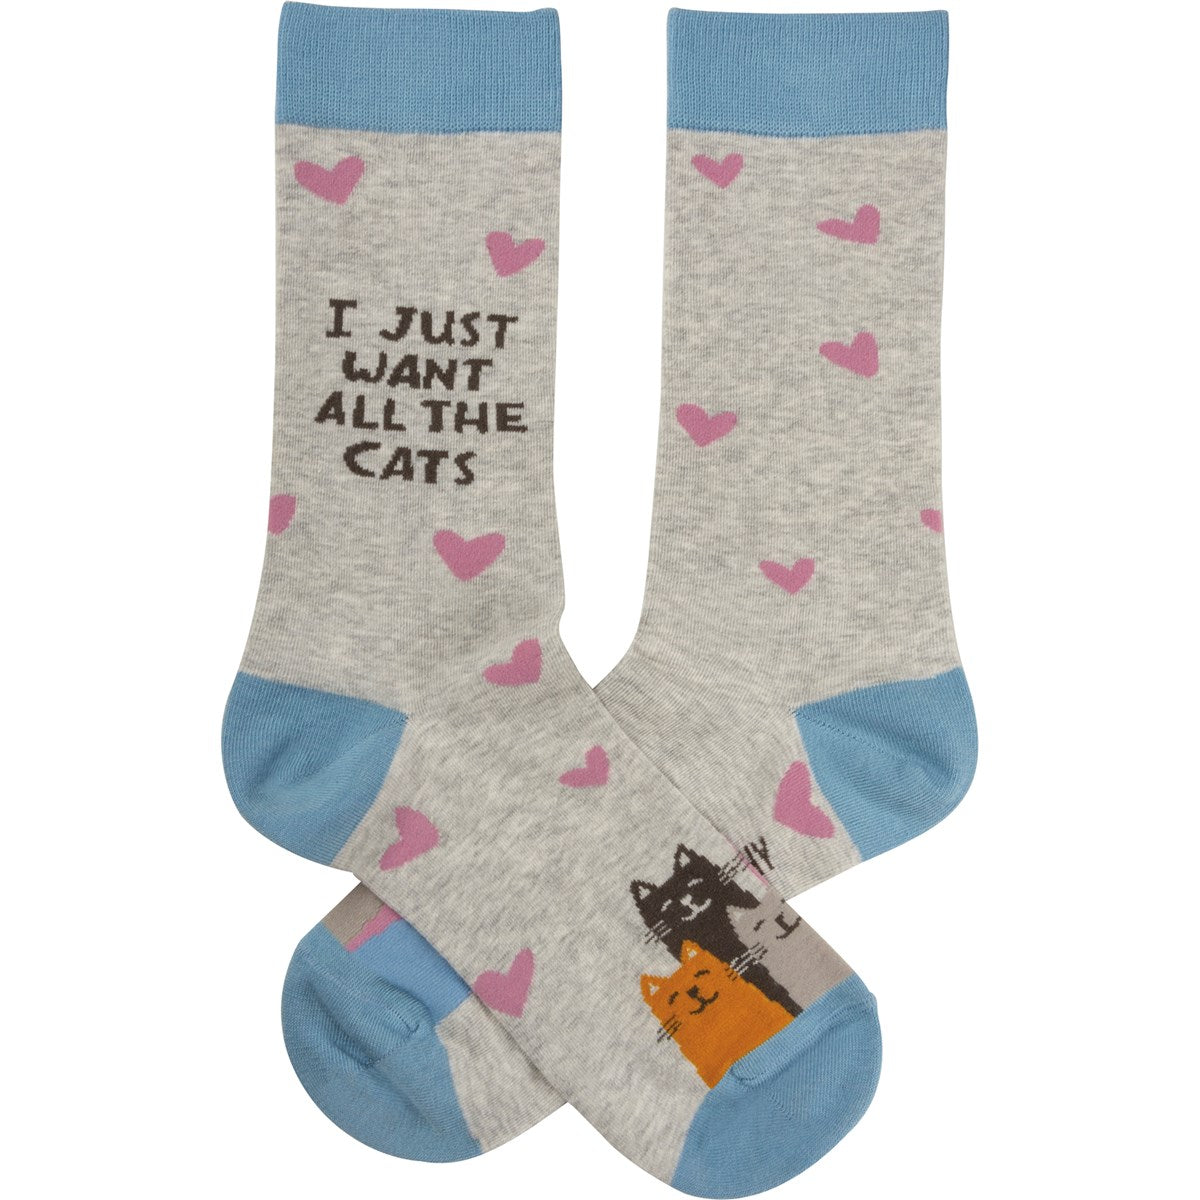 I Just Want All The Cats Unisex Fun Socks